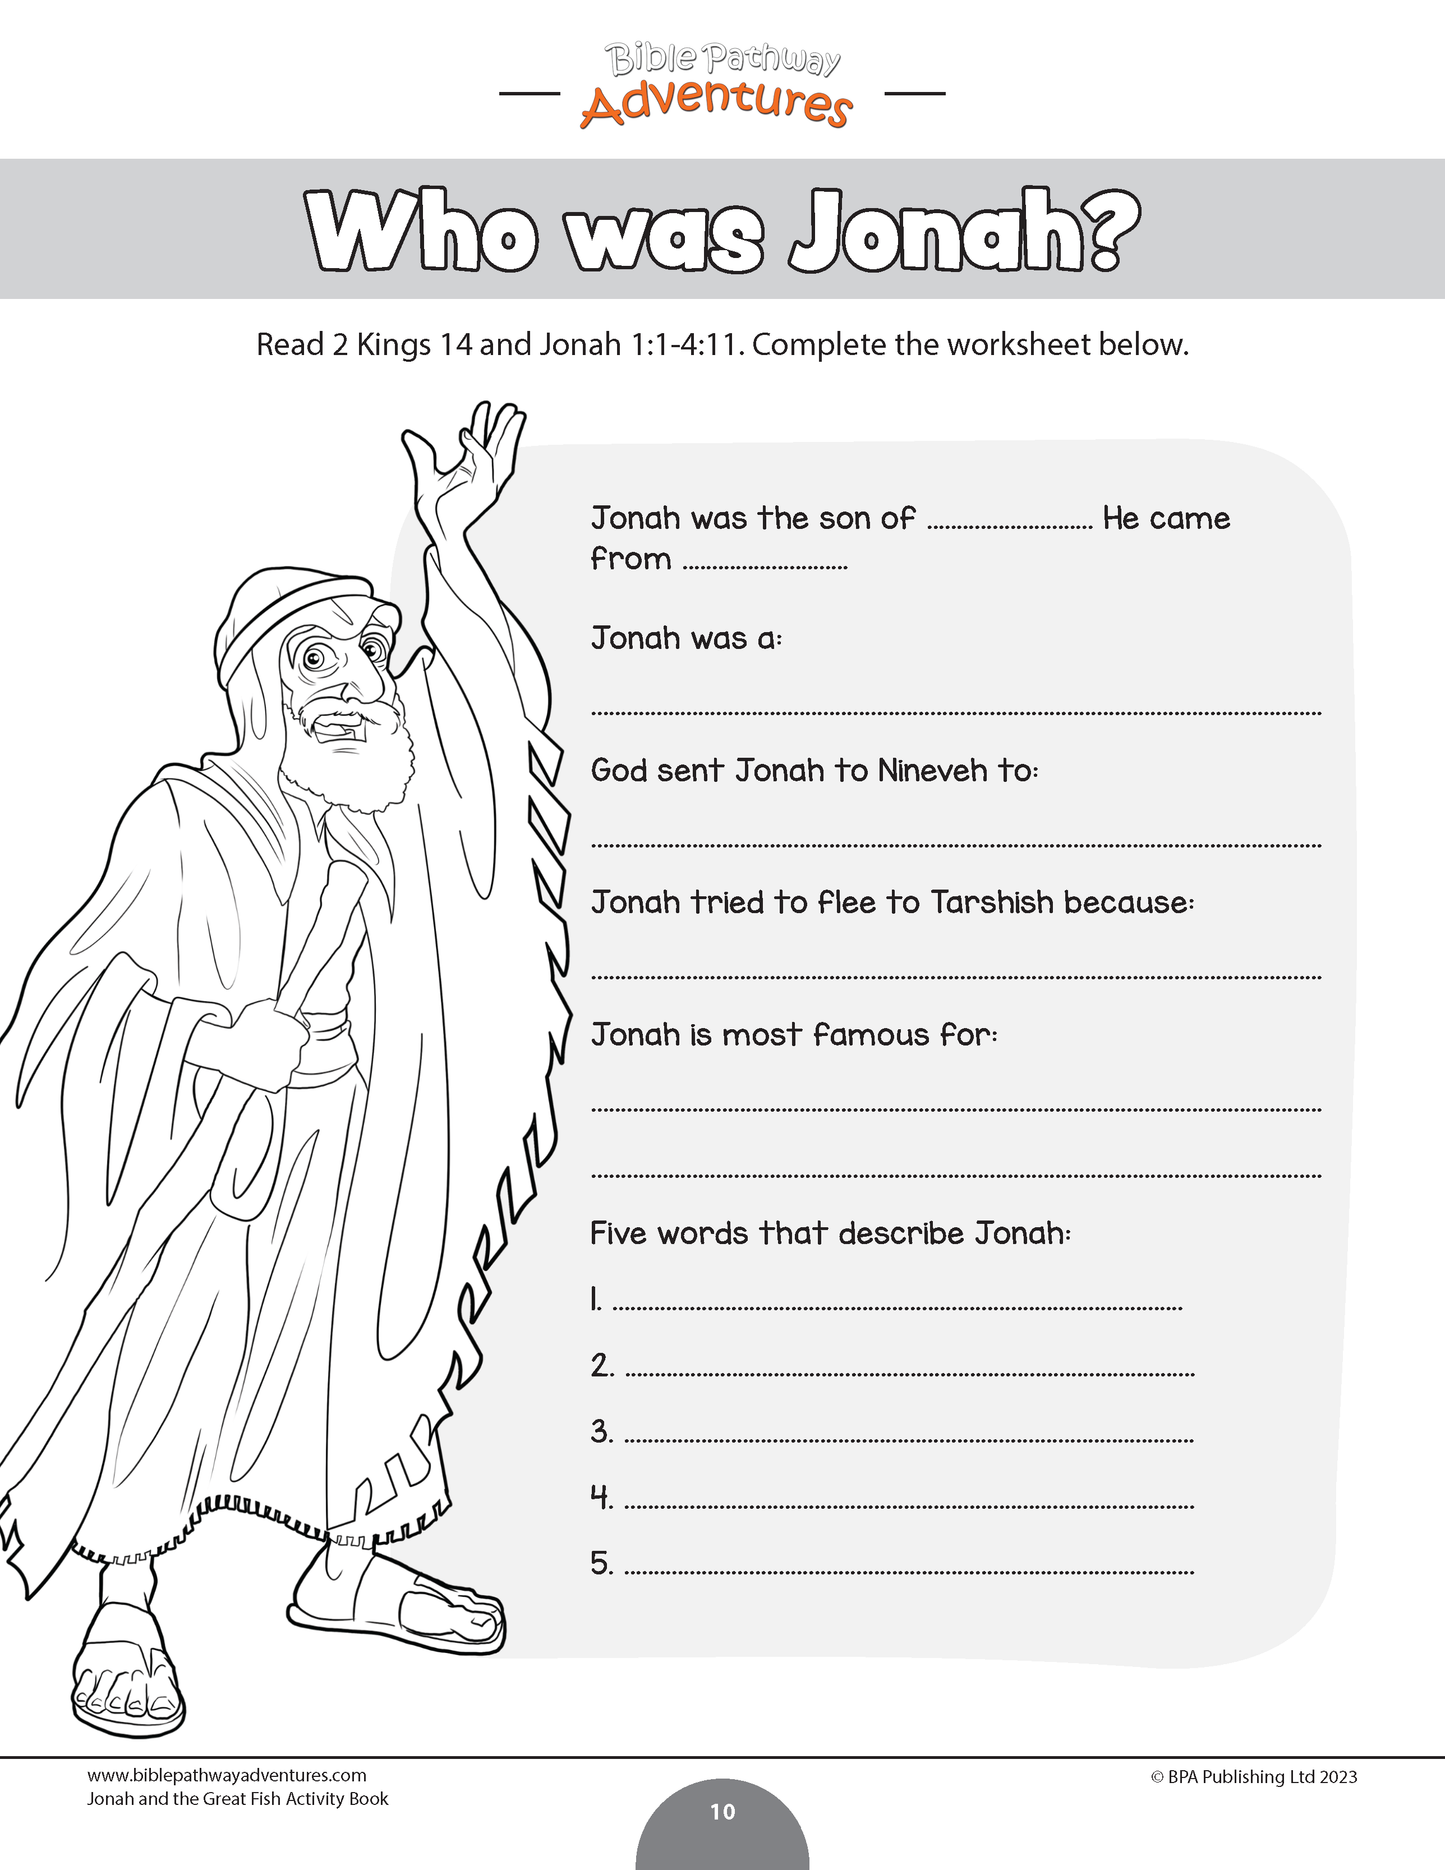 Jonah and the Great Fish Activity Book (PDF)